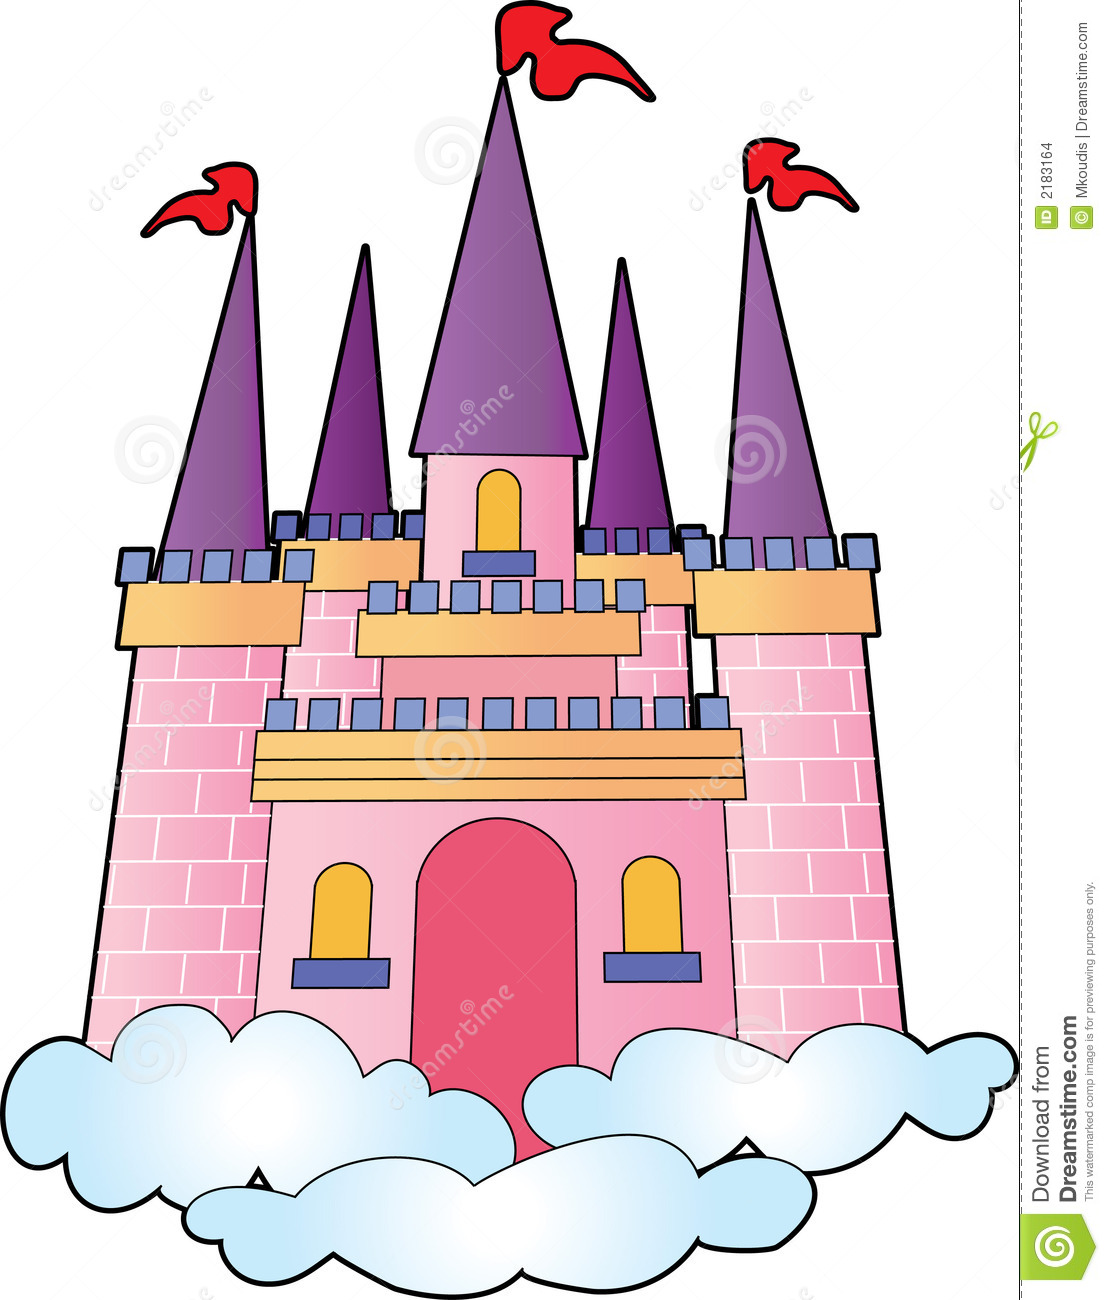 Download Vector About Cindere